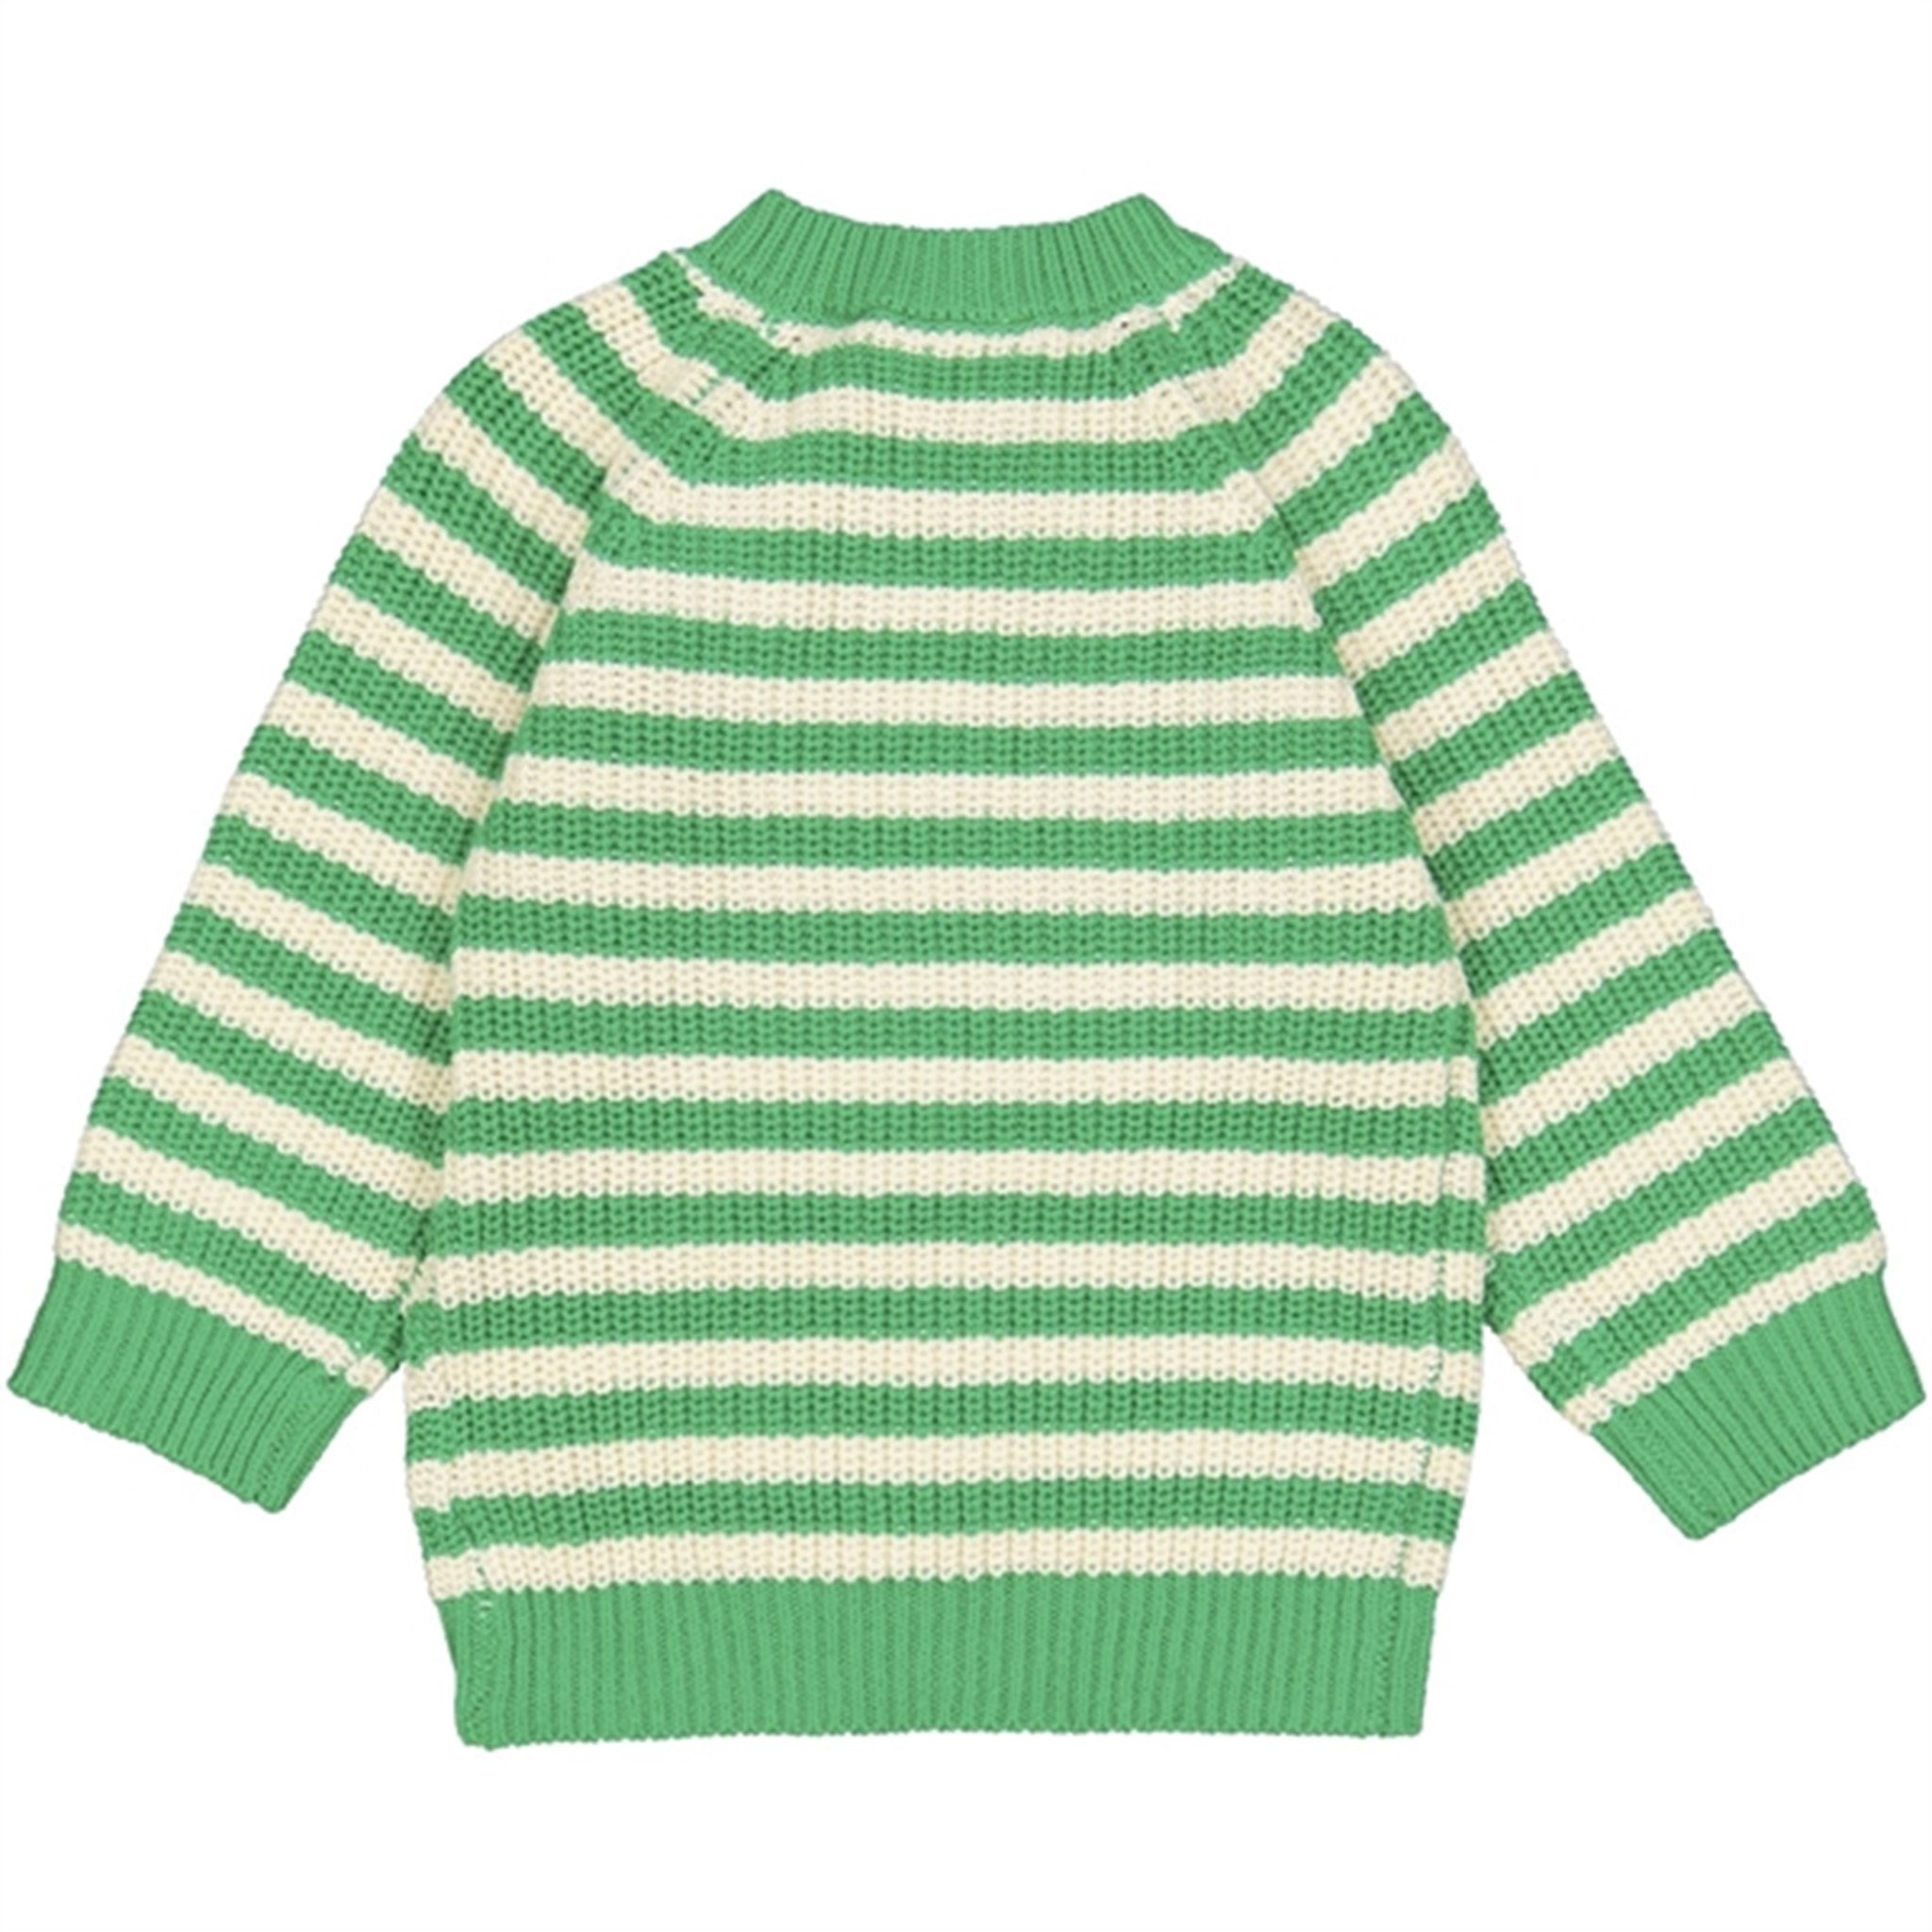 THE NEW Siblings Bright Green Ilfred Stickat Sweater 5